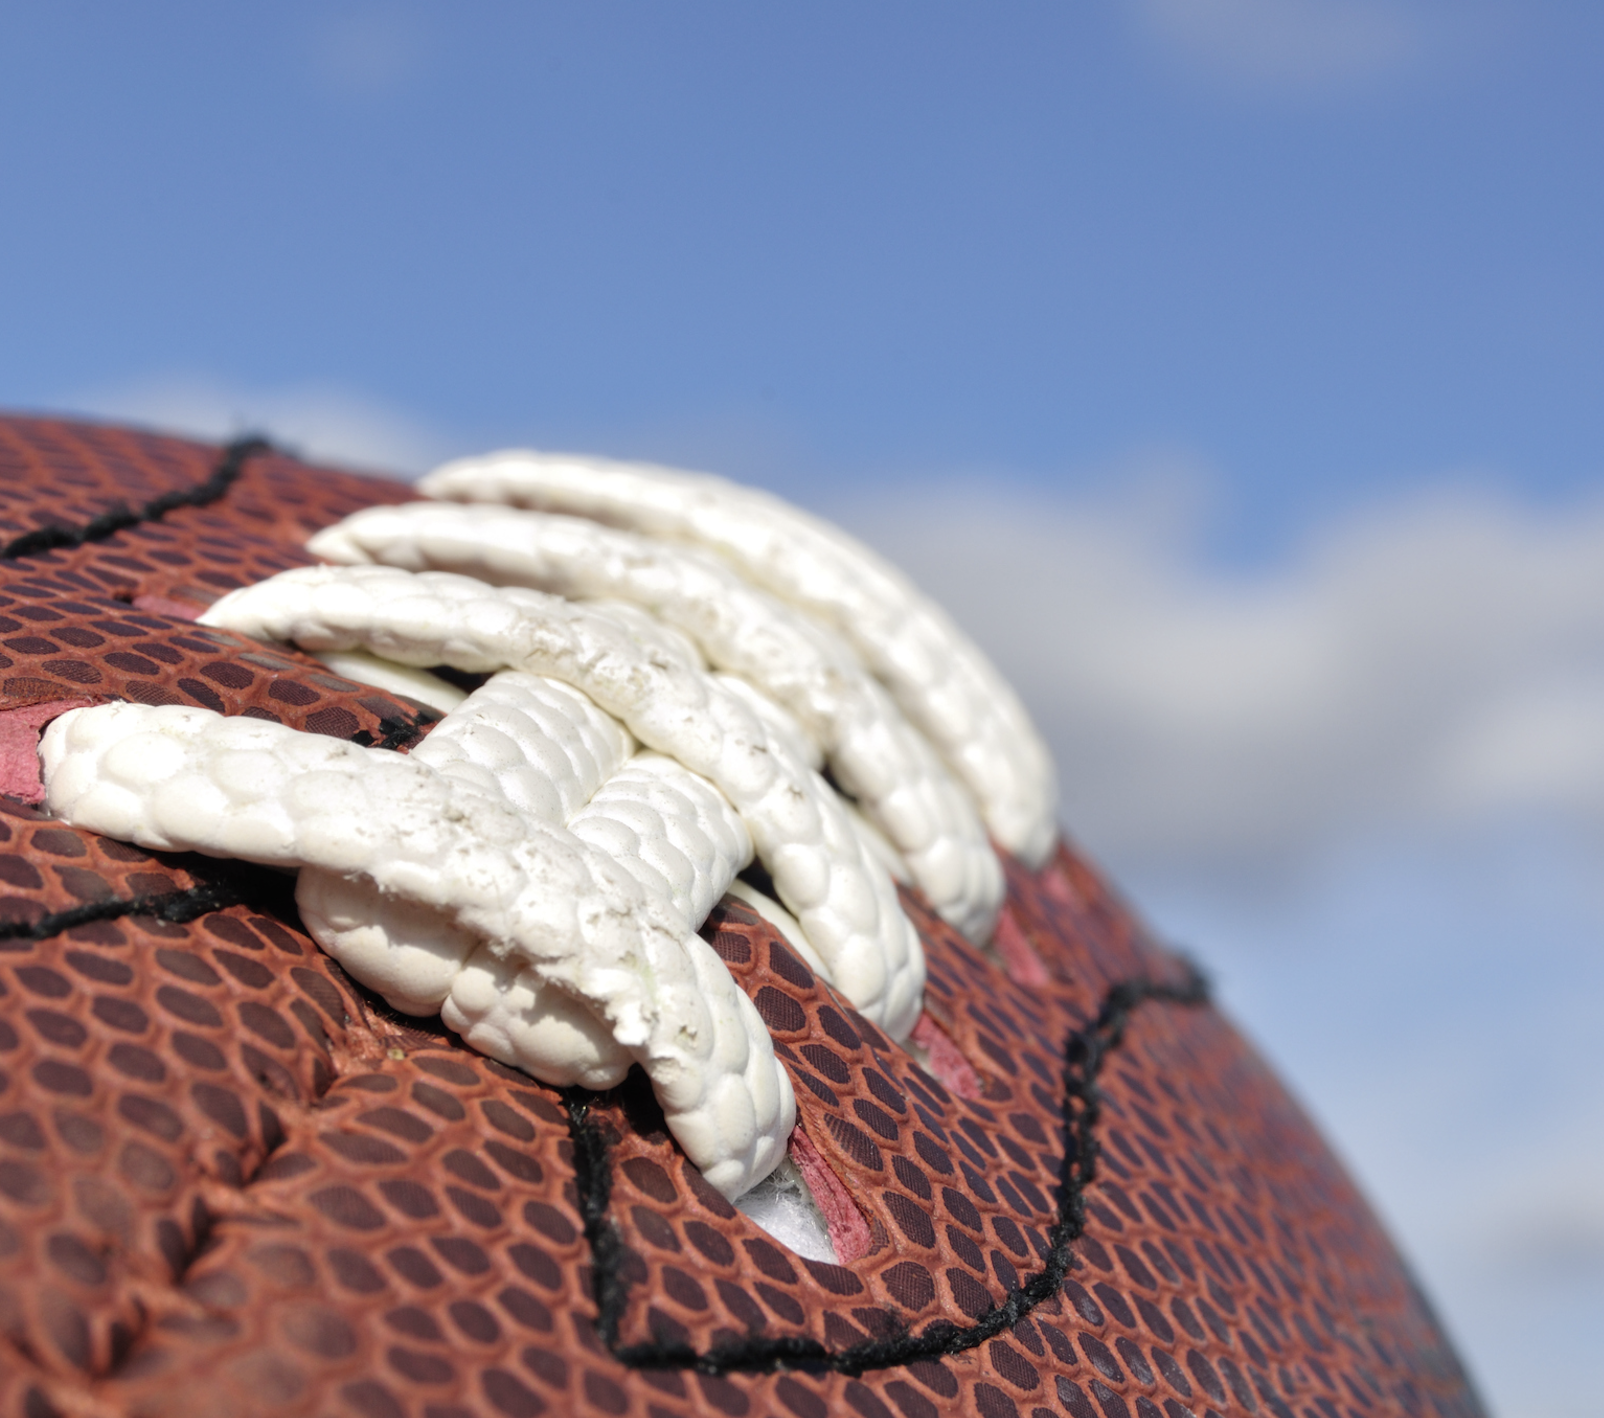 Closeup photo of a brown football with white laces and a blue sky beyond.